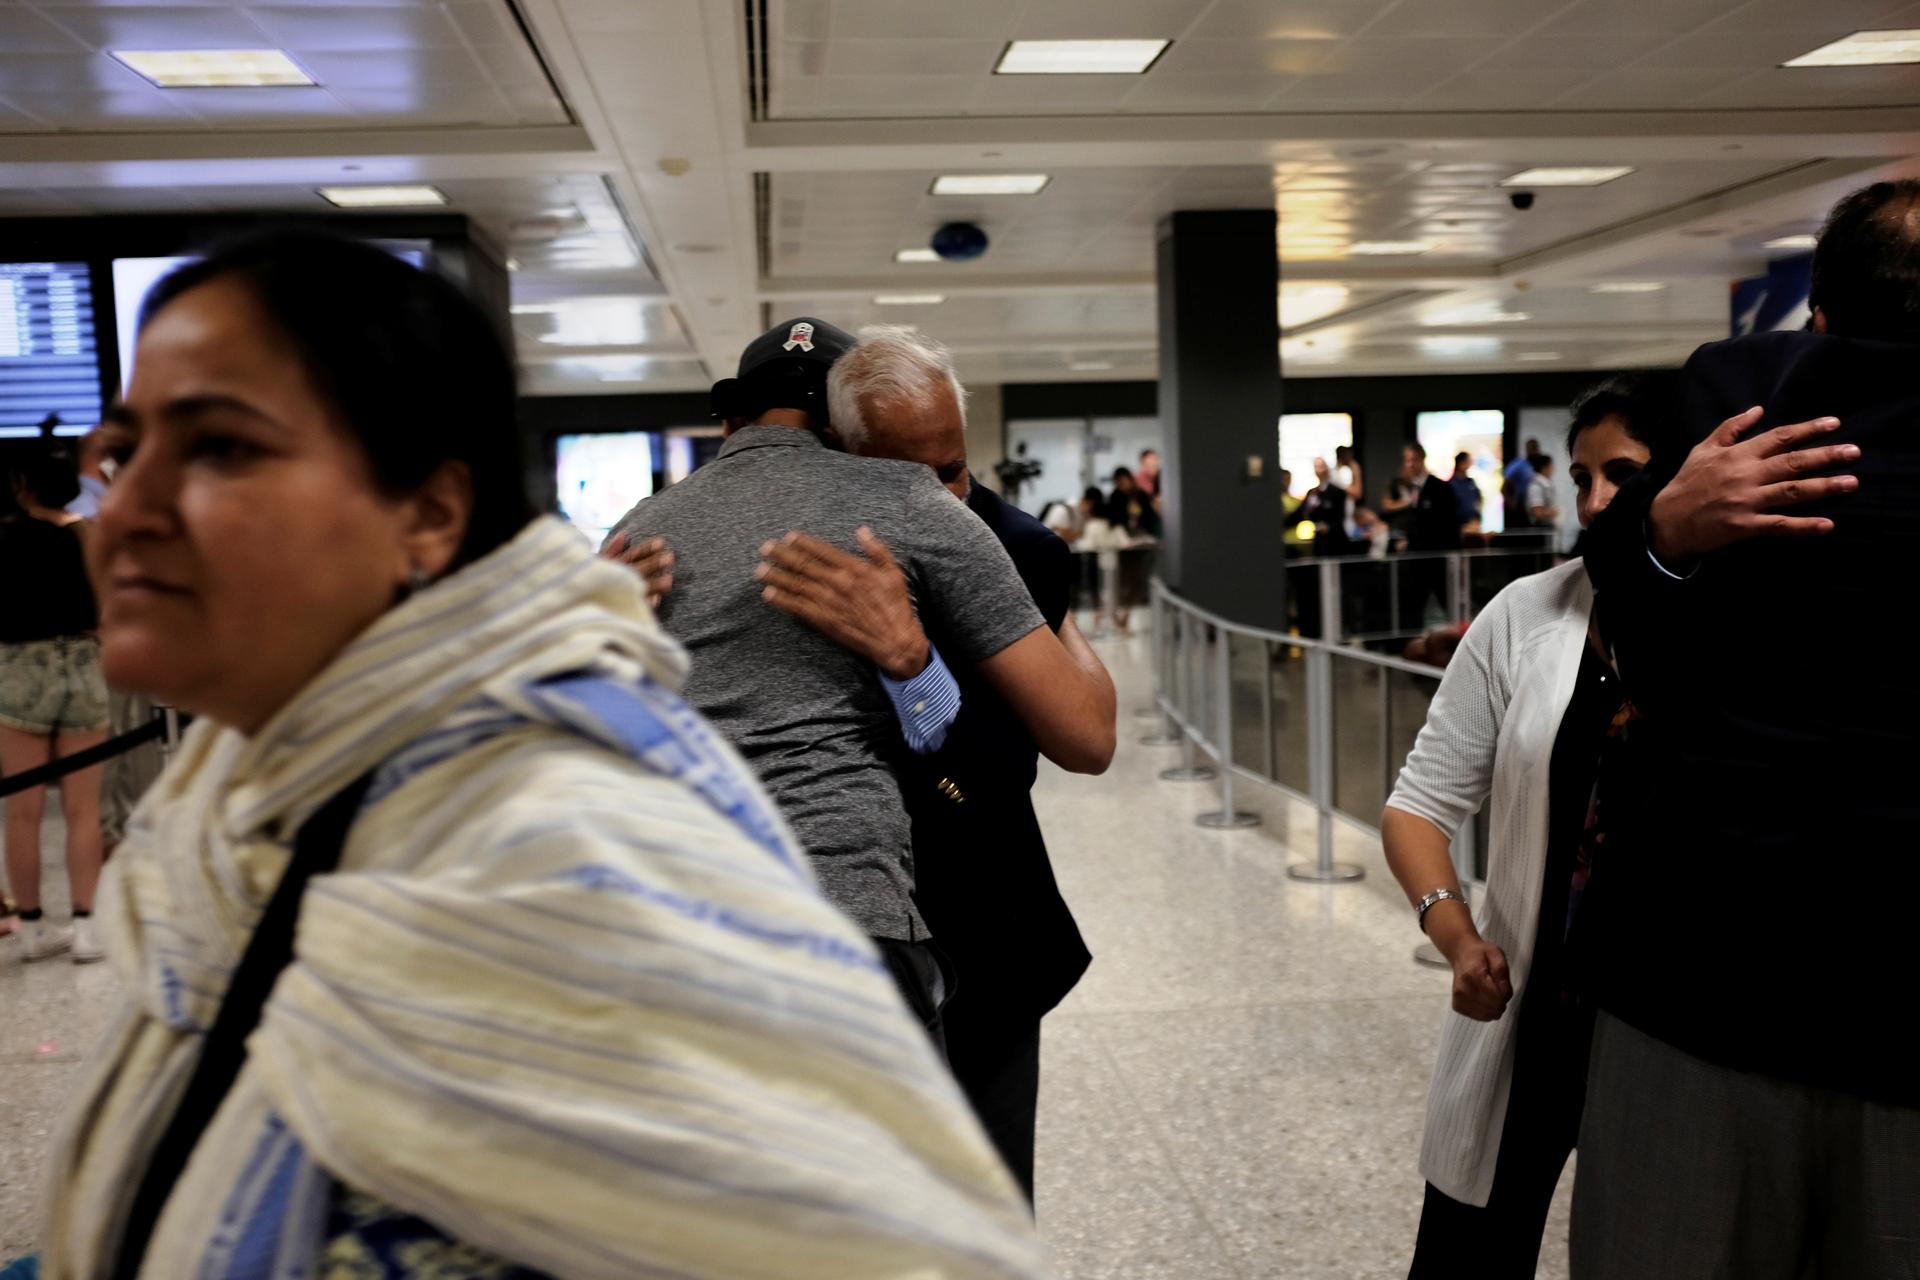 International passengers embrace family members as they arrive at Washington Dulles International Airport after the Trump administration's travel ban was allowed back into effect pending further judicial review, in Dulles, Virginia, U.S., June 29, 2017.